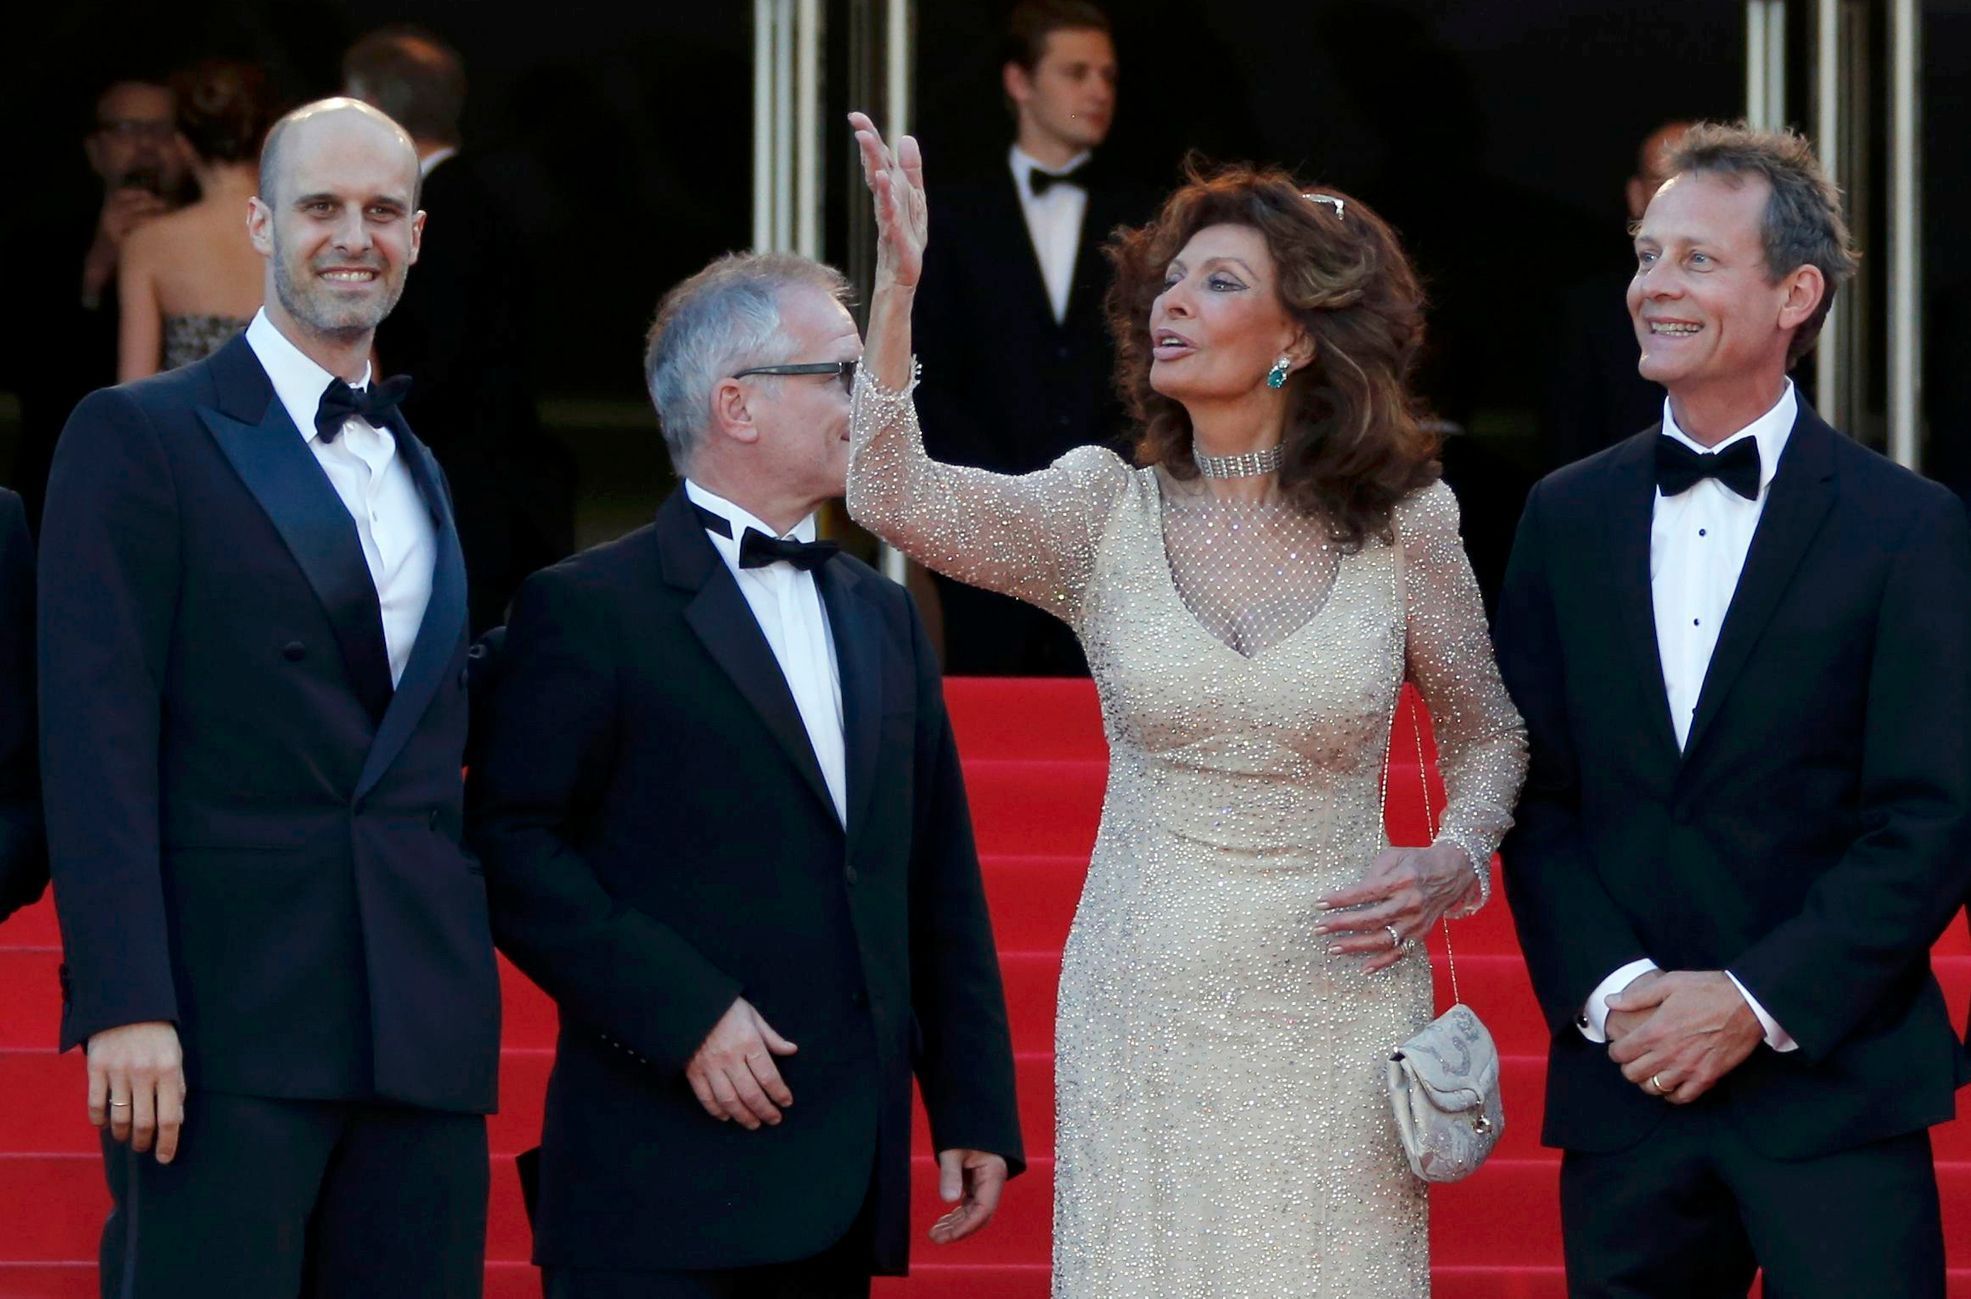 Actress Sophia Loren poses on the red carpet as she arrives for the screening of the film &quot;Deux jours, une nuit&quot; at the 67th Cannes Film Festival in Cannes